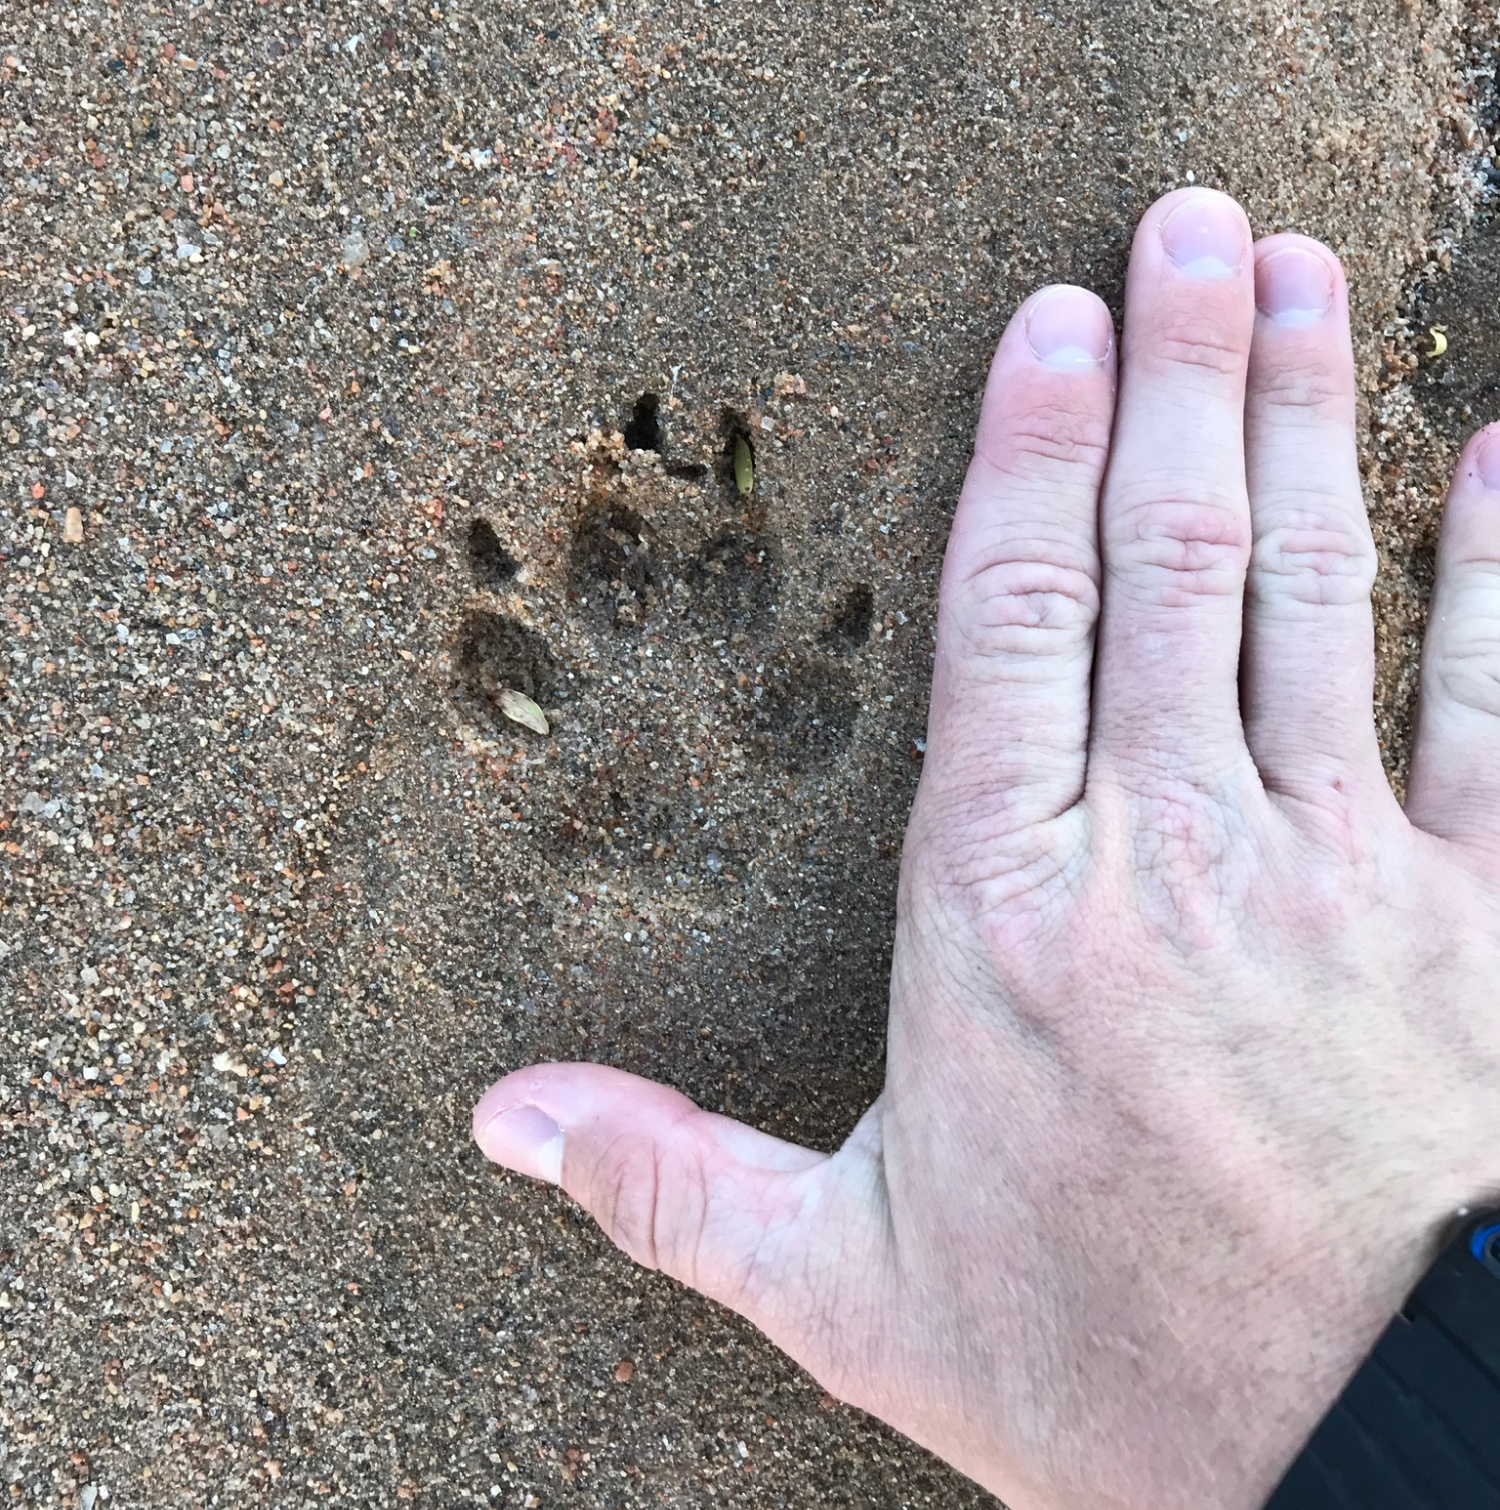 A domestic dog track shows up on wet sand.